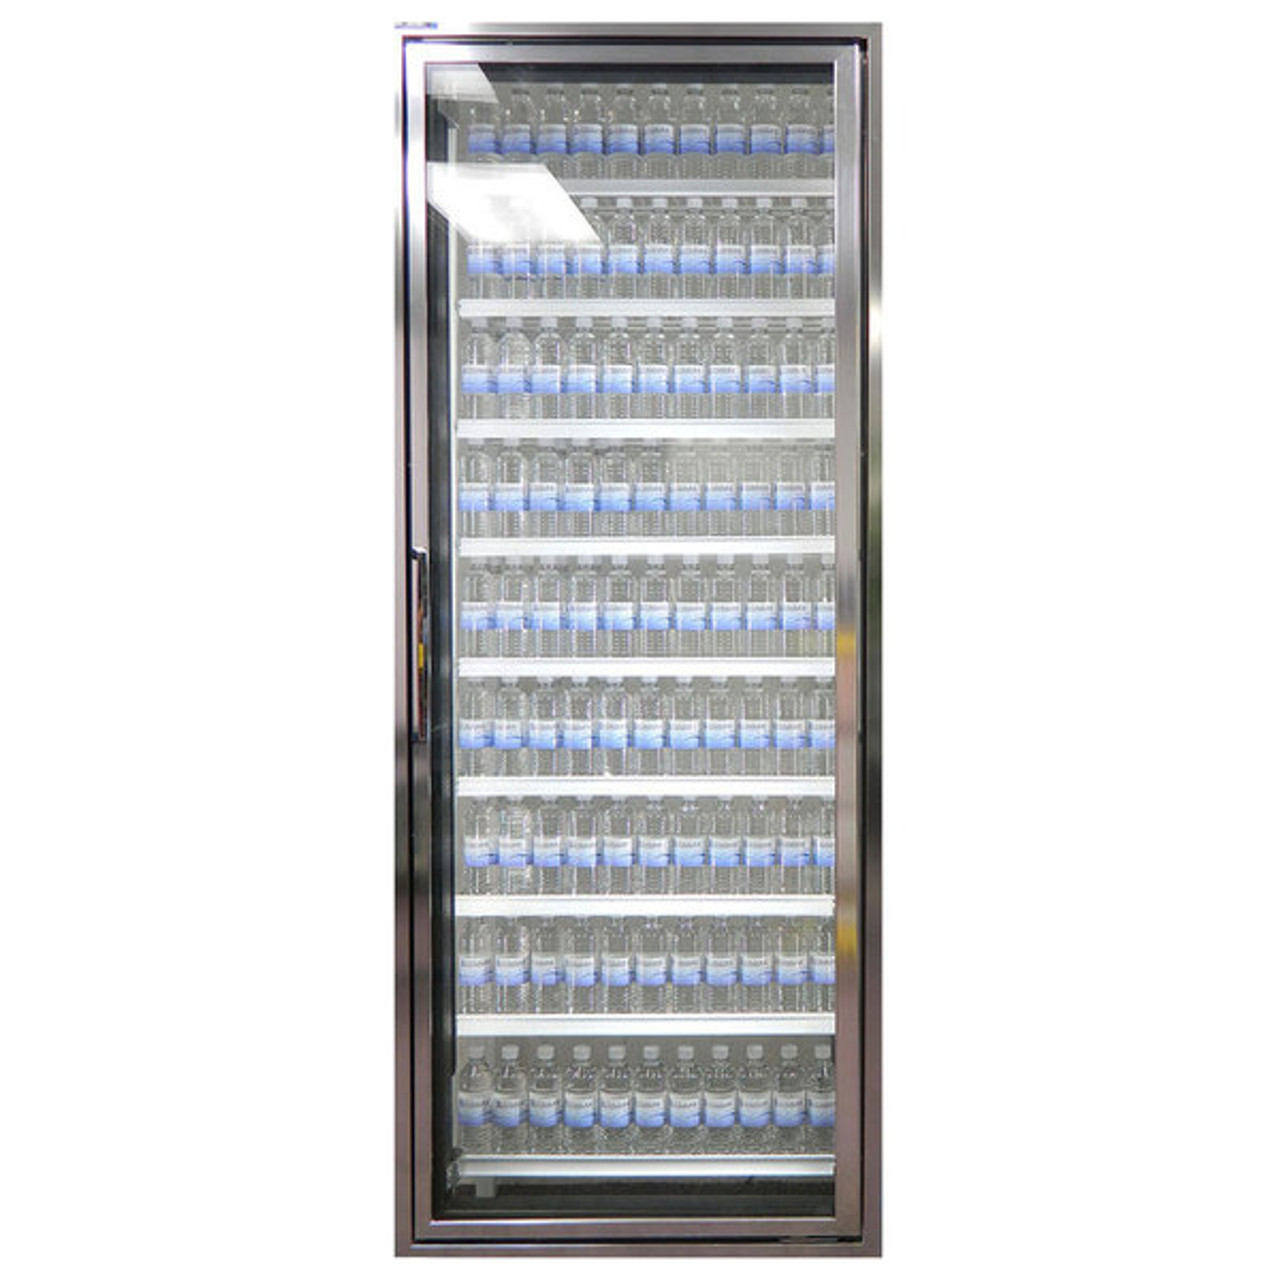 Classic Plus 26" x 72" Walk-In Freezer Merchandiser Door with Shelving - Anodized Bright Silver, Right Hinge-Styleline CL2672-LT 